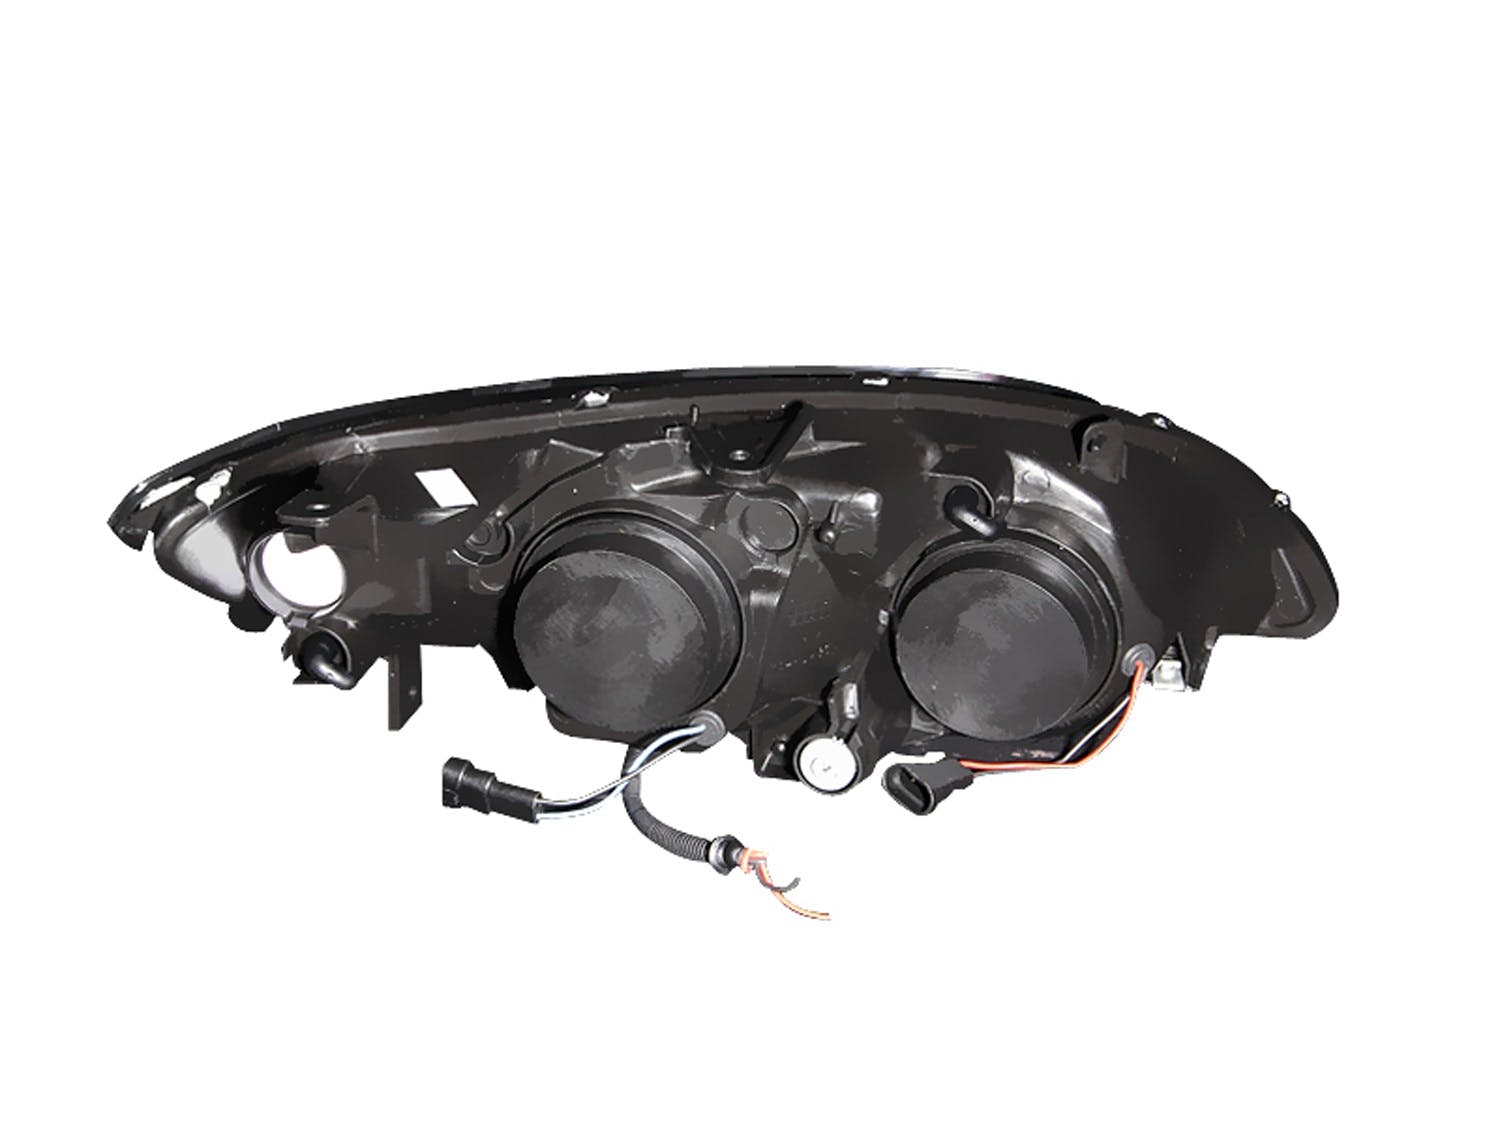 AnzoUSA 121059 Projector Headlights with Halo Black